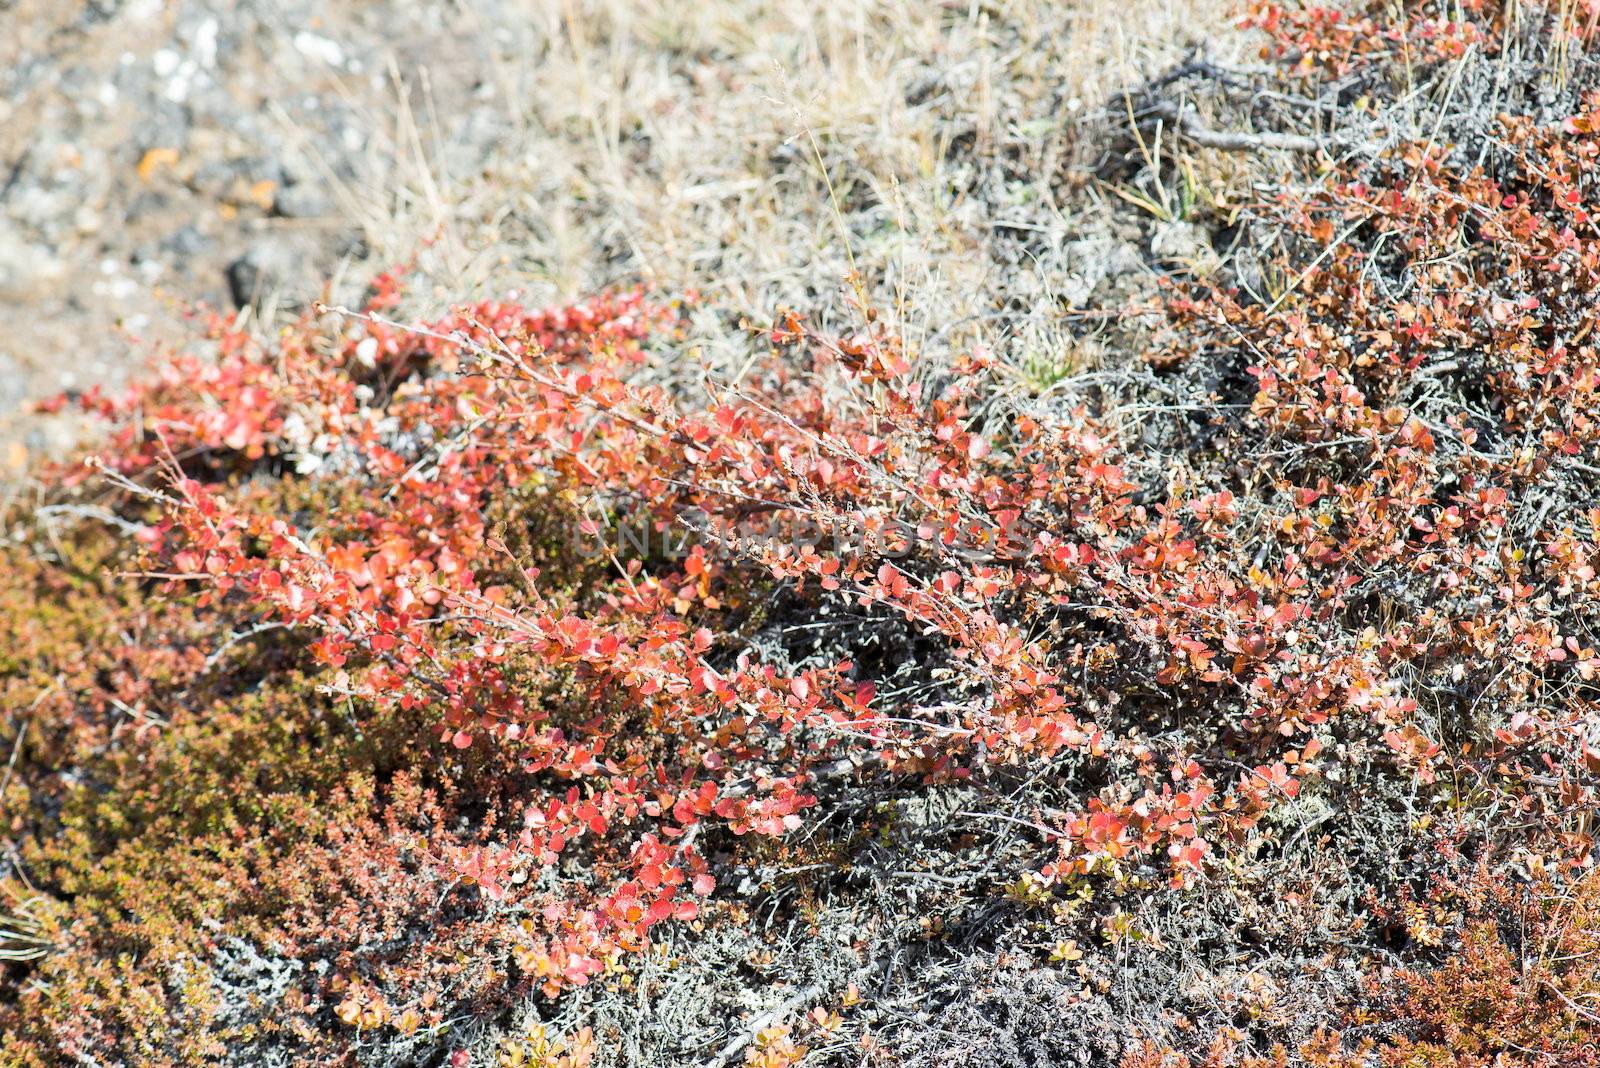 Betula nana, dwarf birch in Greenland in autumn with red leaves and other plants around